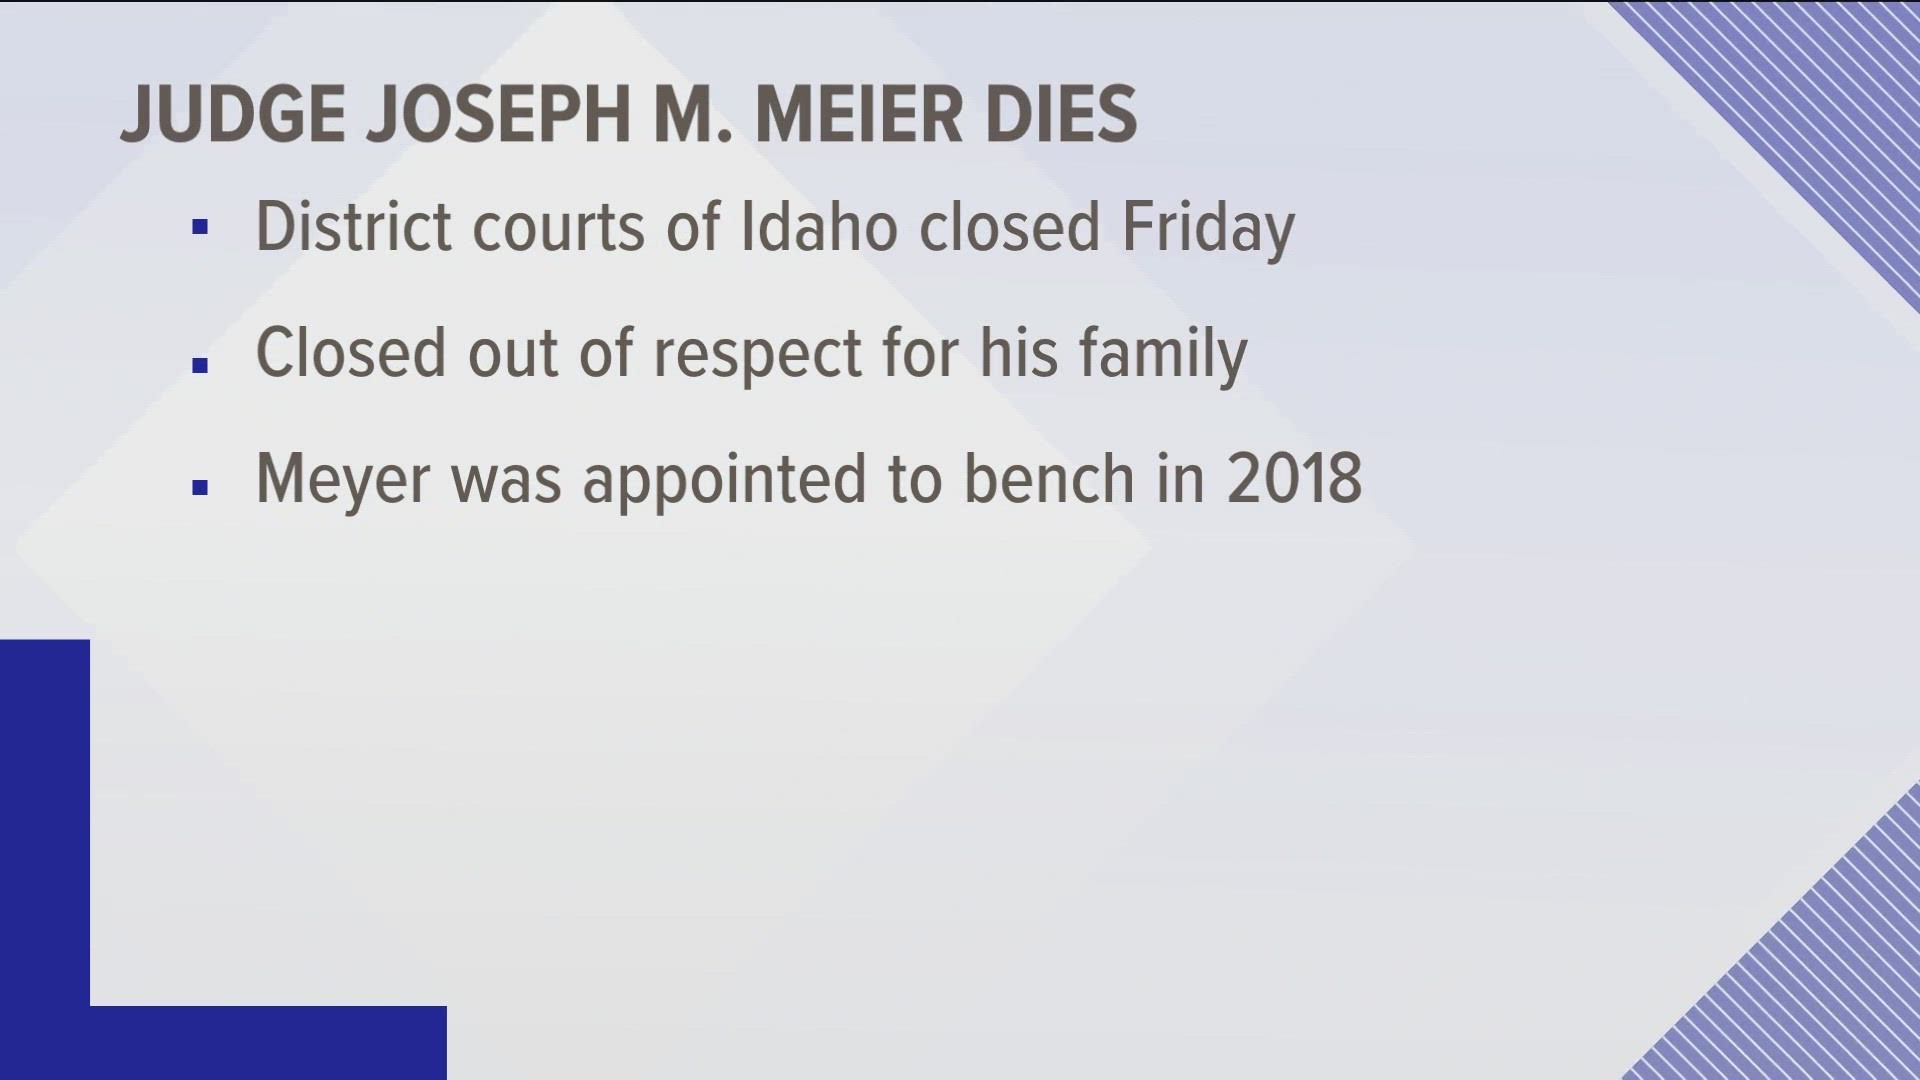 In honor of his passing, the Boise, Pocatello and Coeur d'Alene courts will be closed Friday.